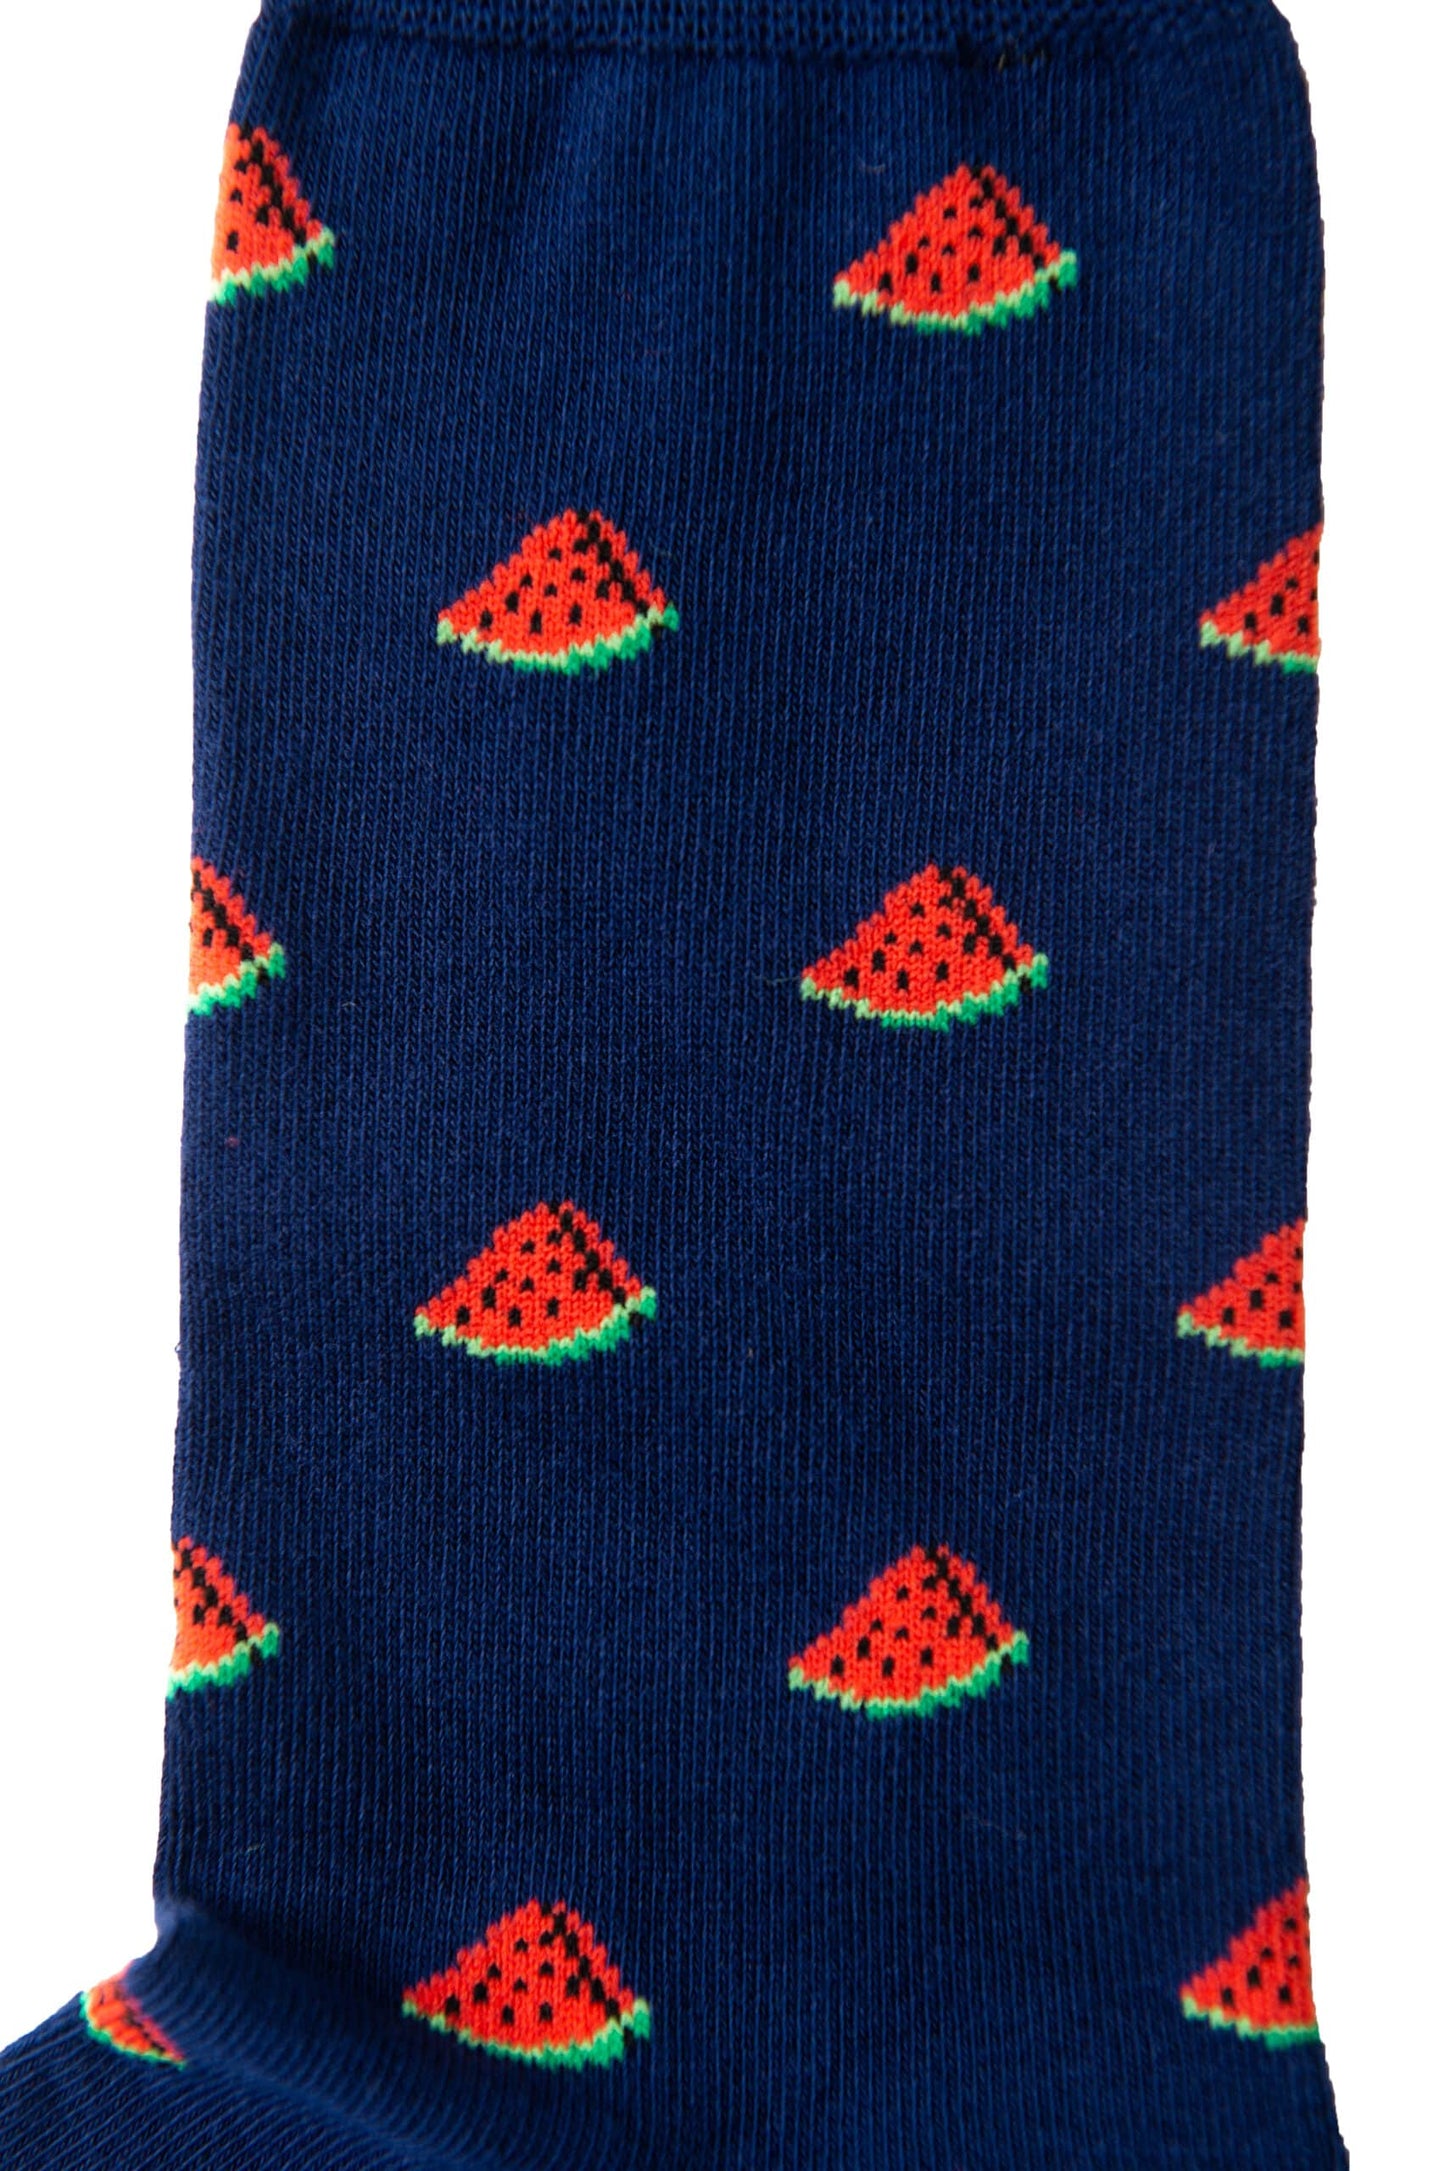 Close-up image of Watermelon Socks with a pattern of small, juicy red watermelon slices with green rinds, bringing joy to your fashion step.